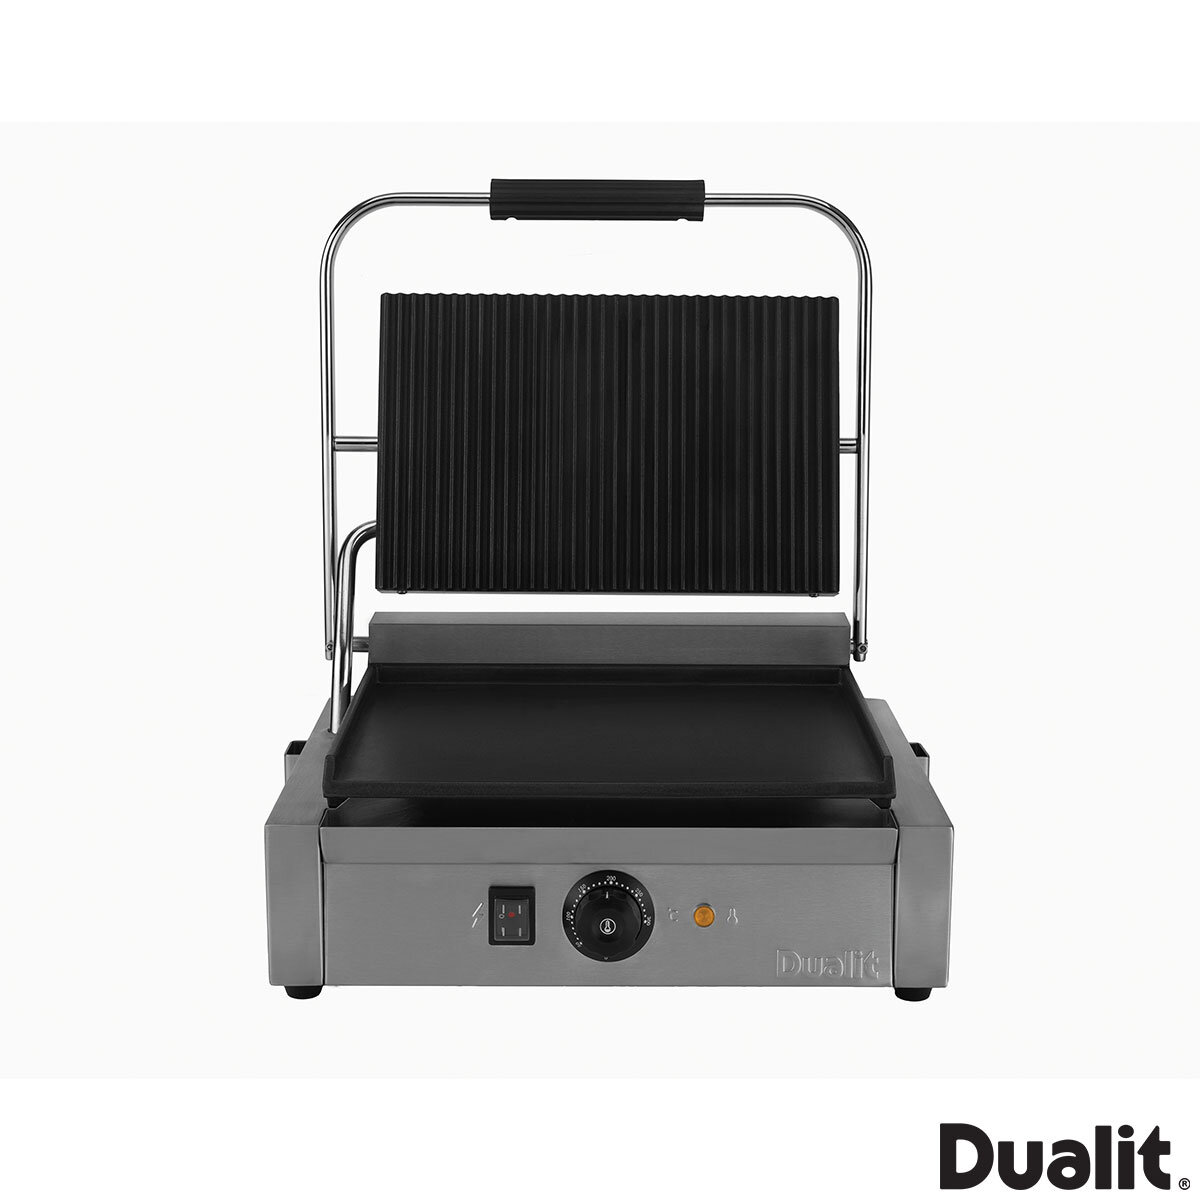 Dualit Commercial Panini Grill, 96001 Costco UK